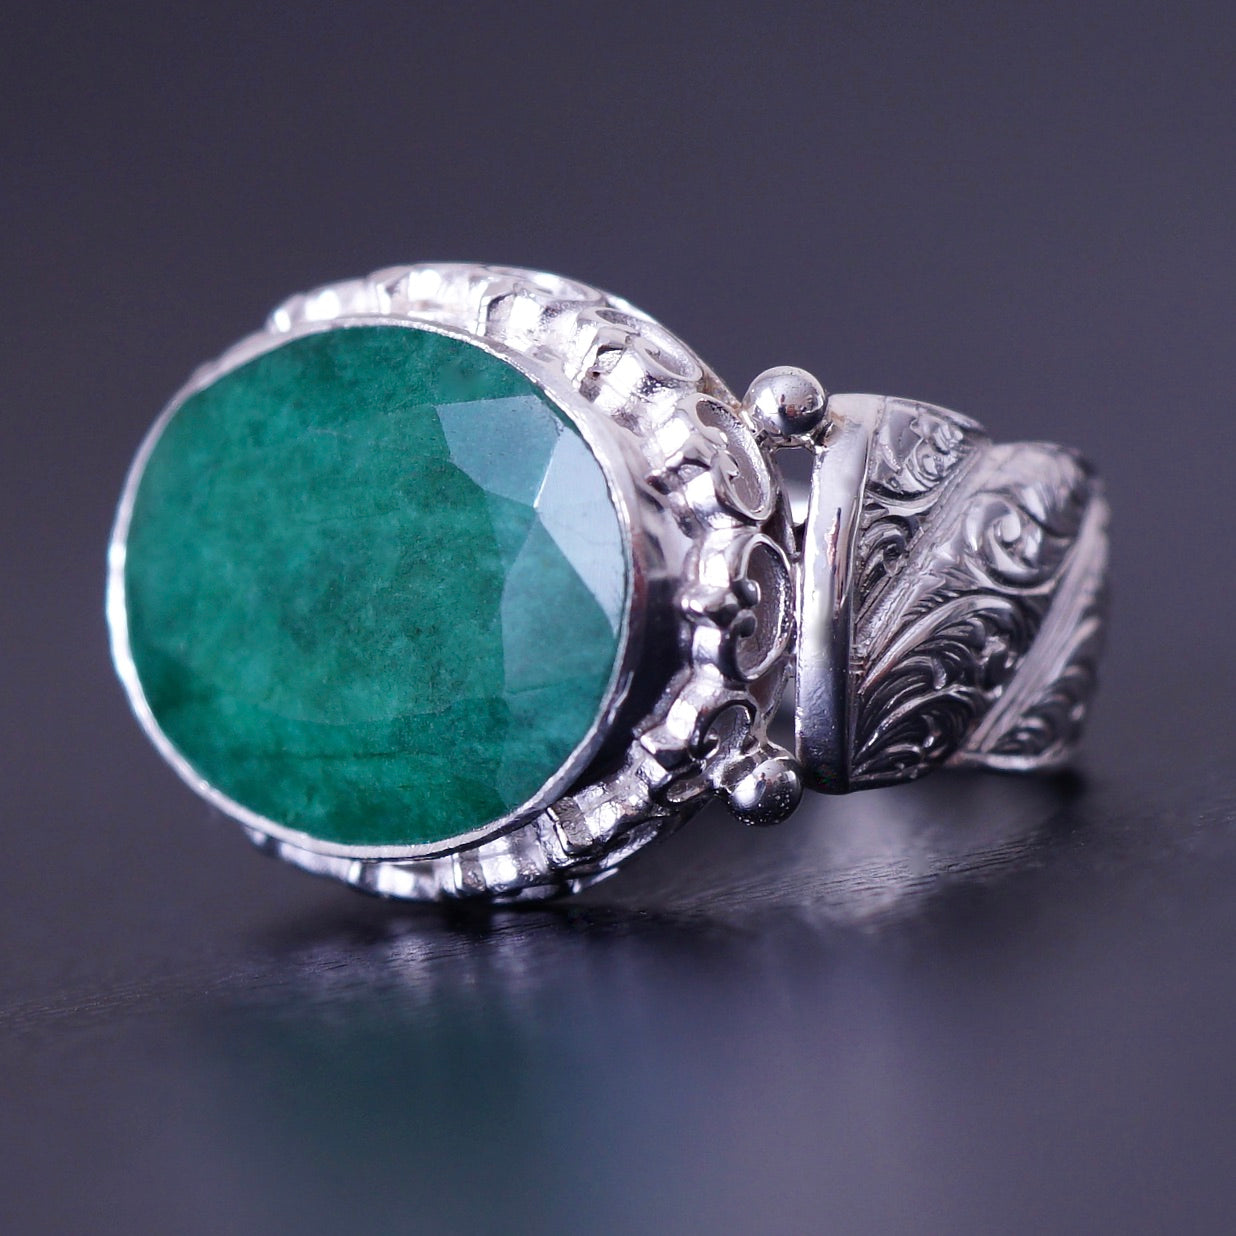 Silver Mens Ring Emerald gemstone Handmade solid 925 Sterling natural Beryl 10ct Unique Artisan Jewelry